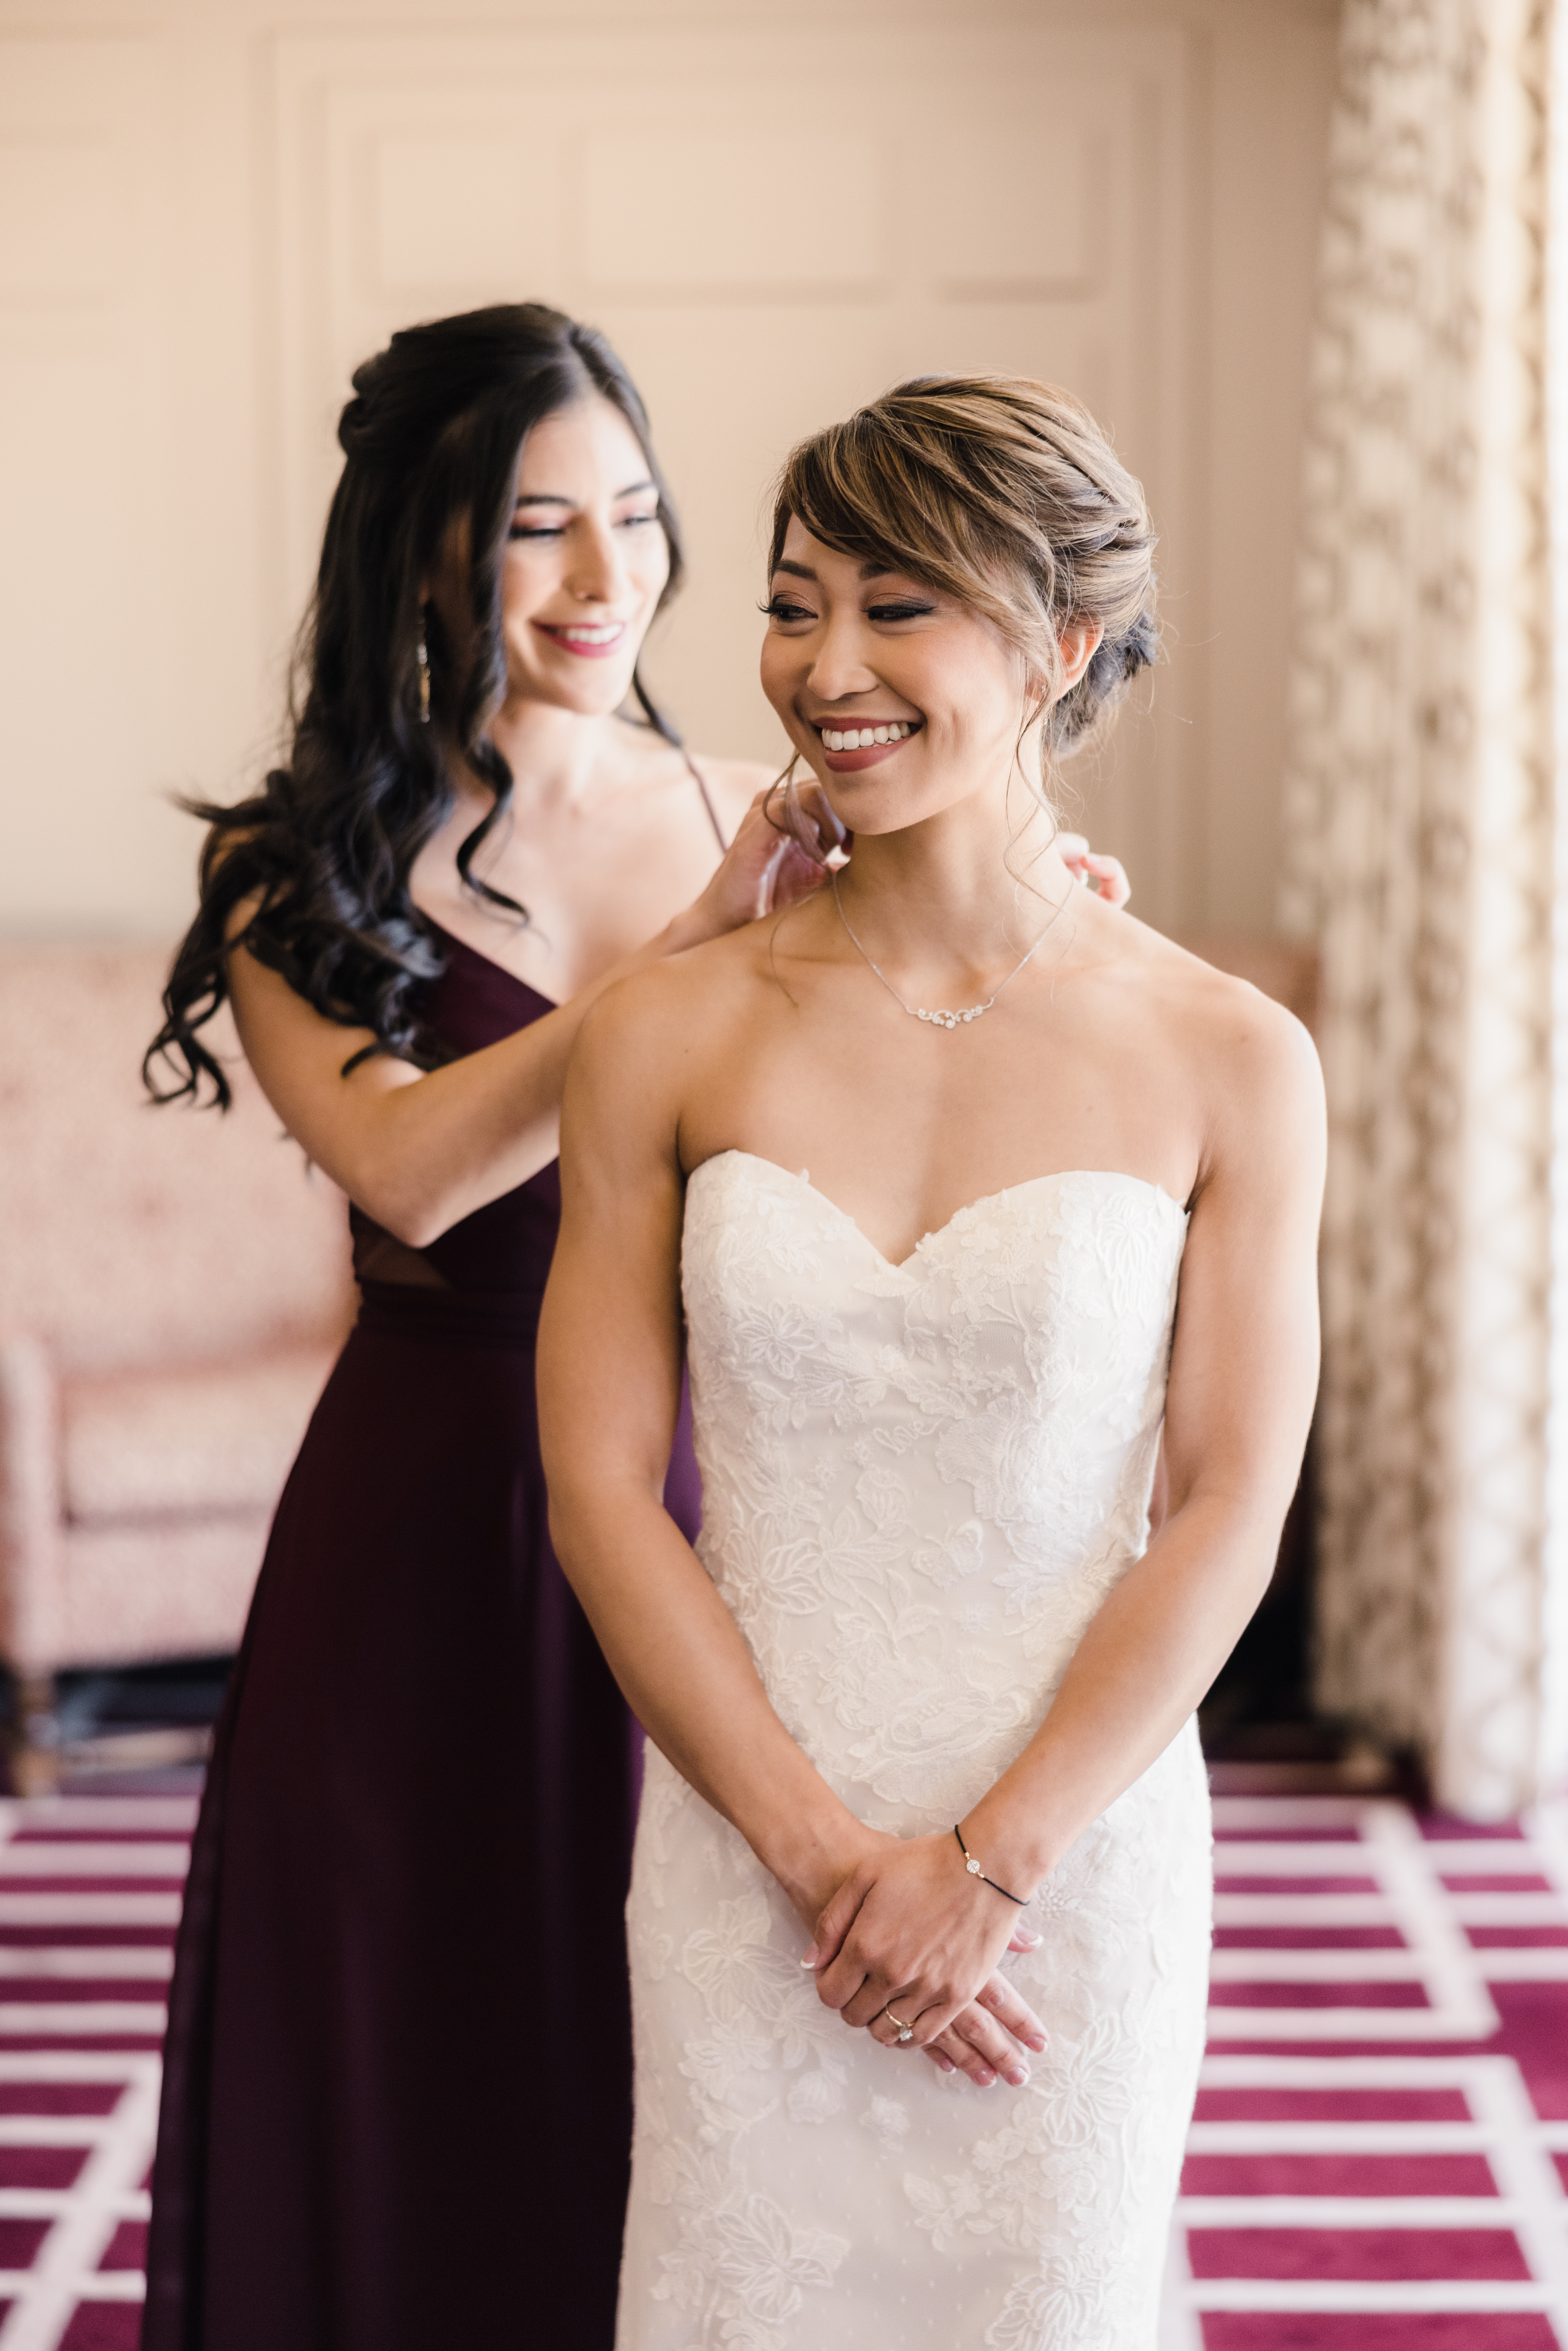 bride in strapless lace wedding dress and chignon hairstyle get help with jewelry from bridesmaid in jewel toned maroon dress